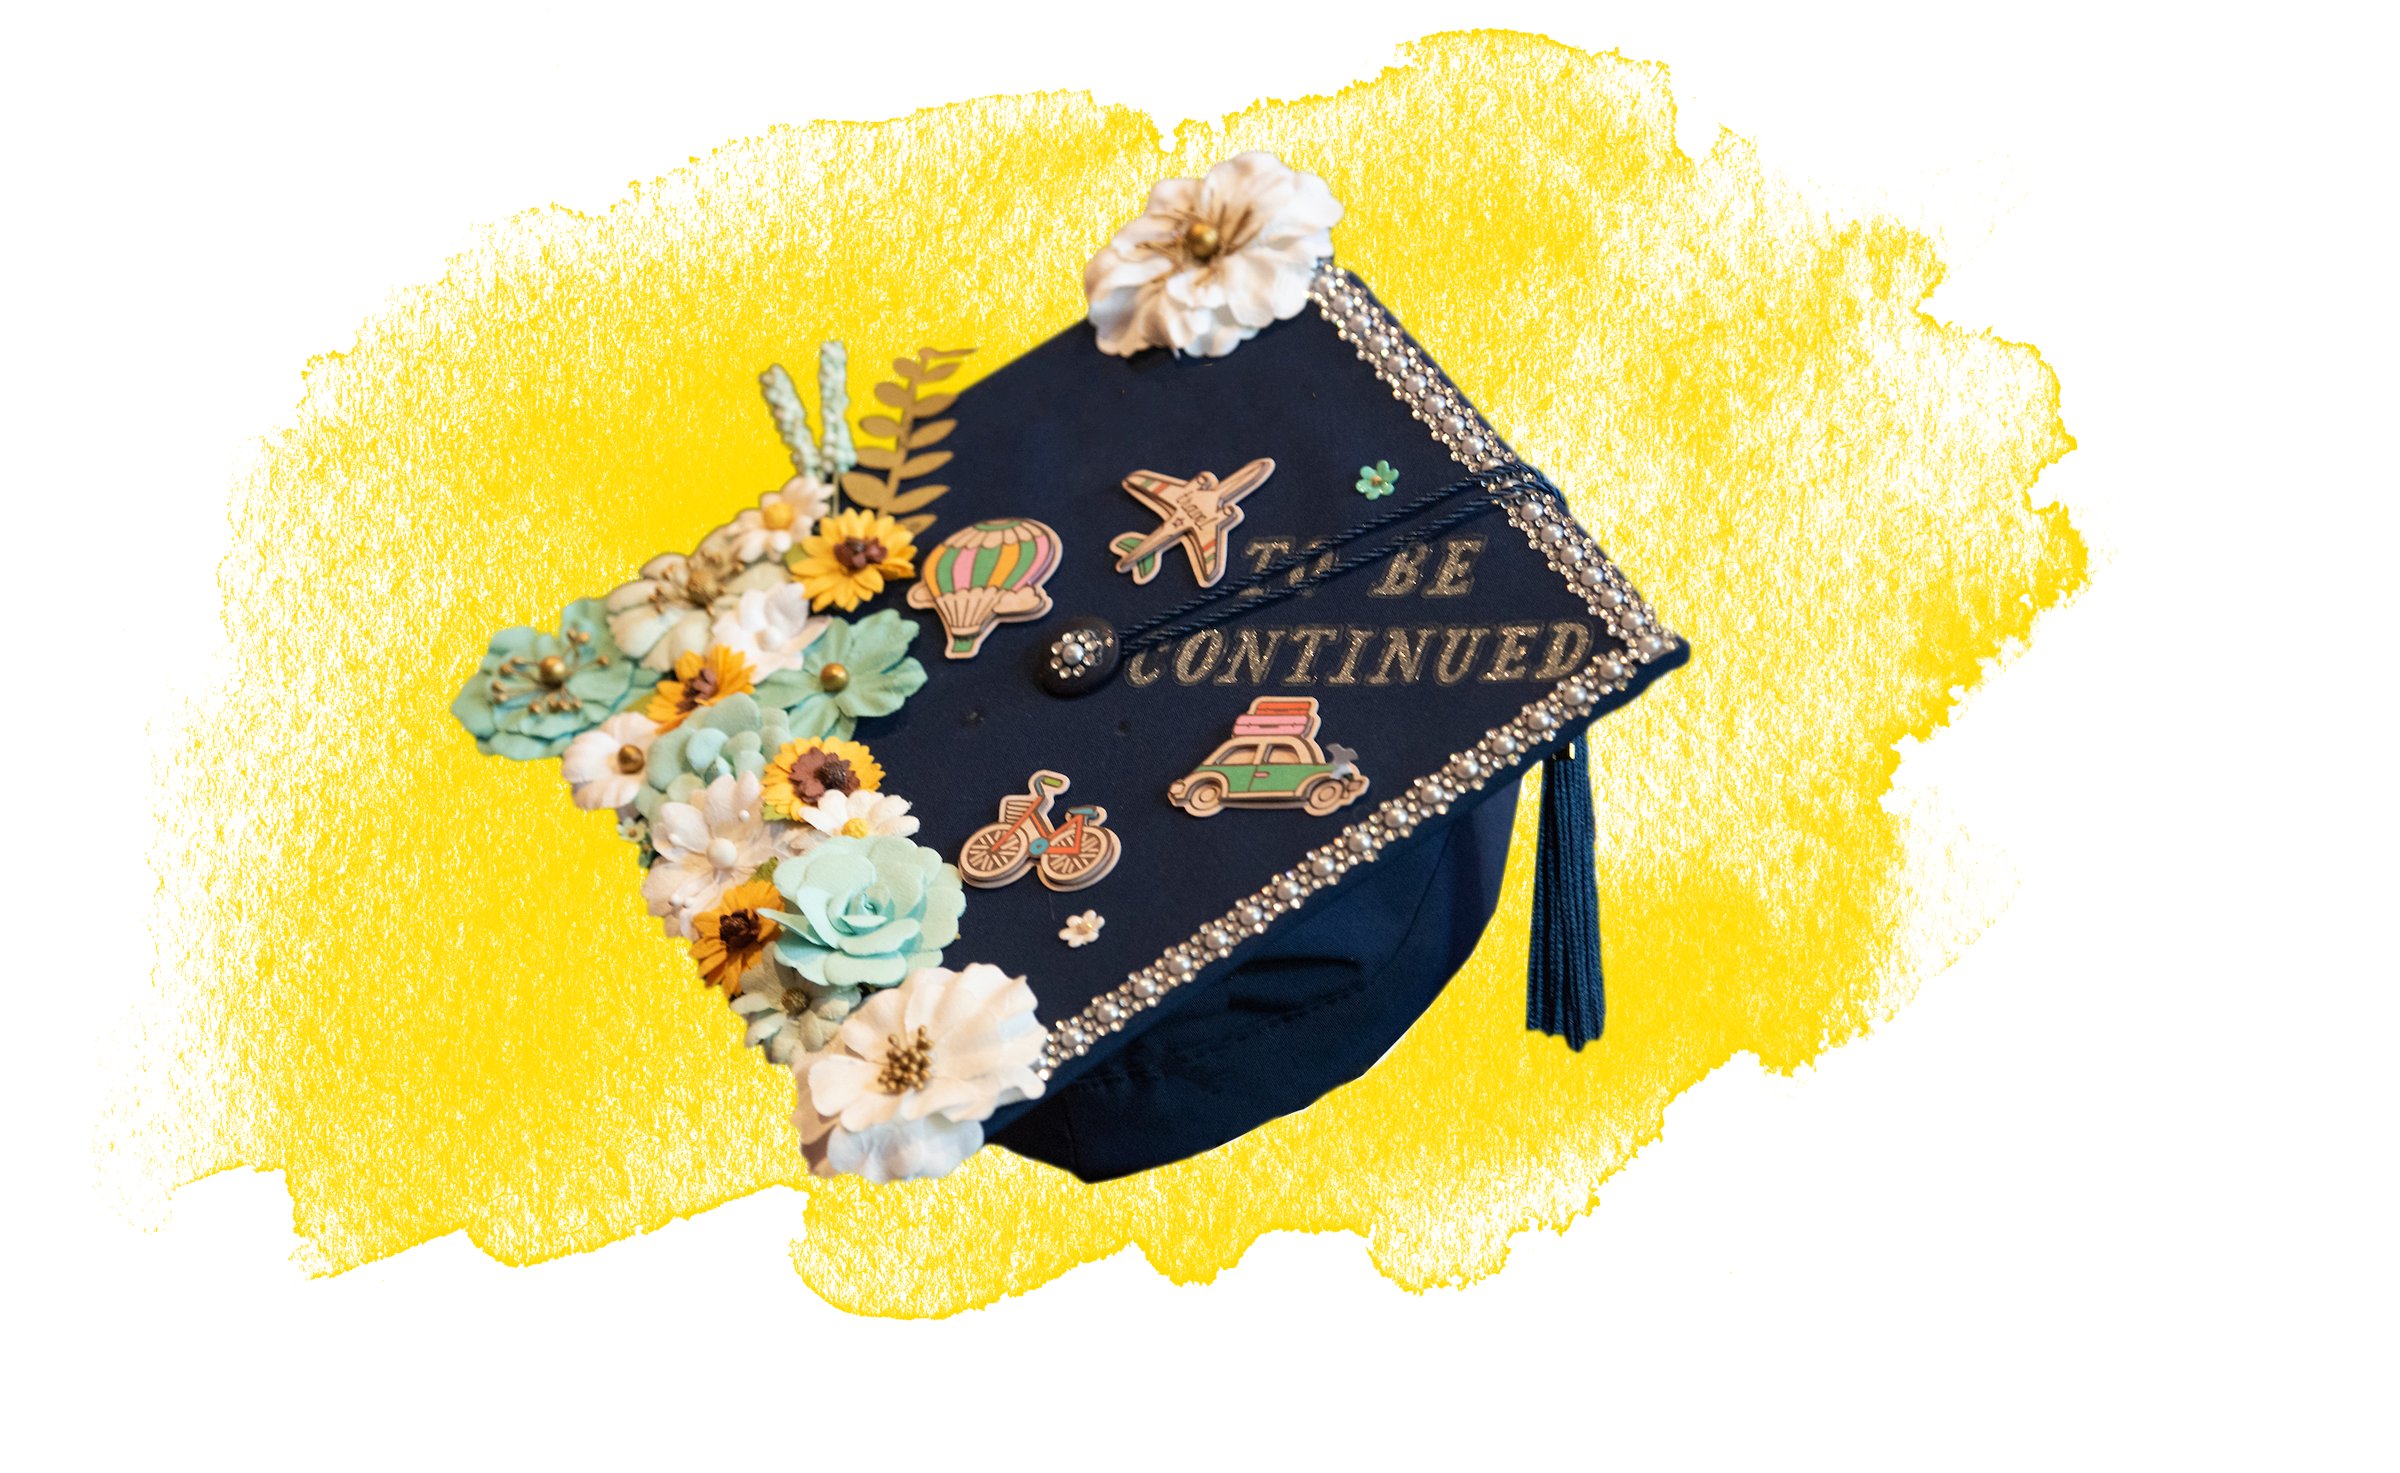 Yellow watercolor brushstroke in the background with a decorated grad cap with paper flowers, scrapbook decorations, and a tassle on top.